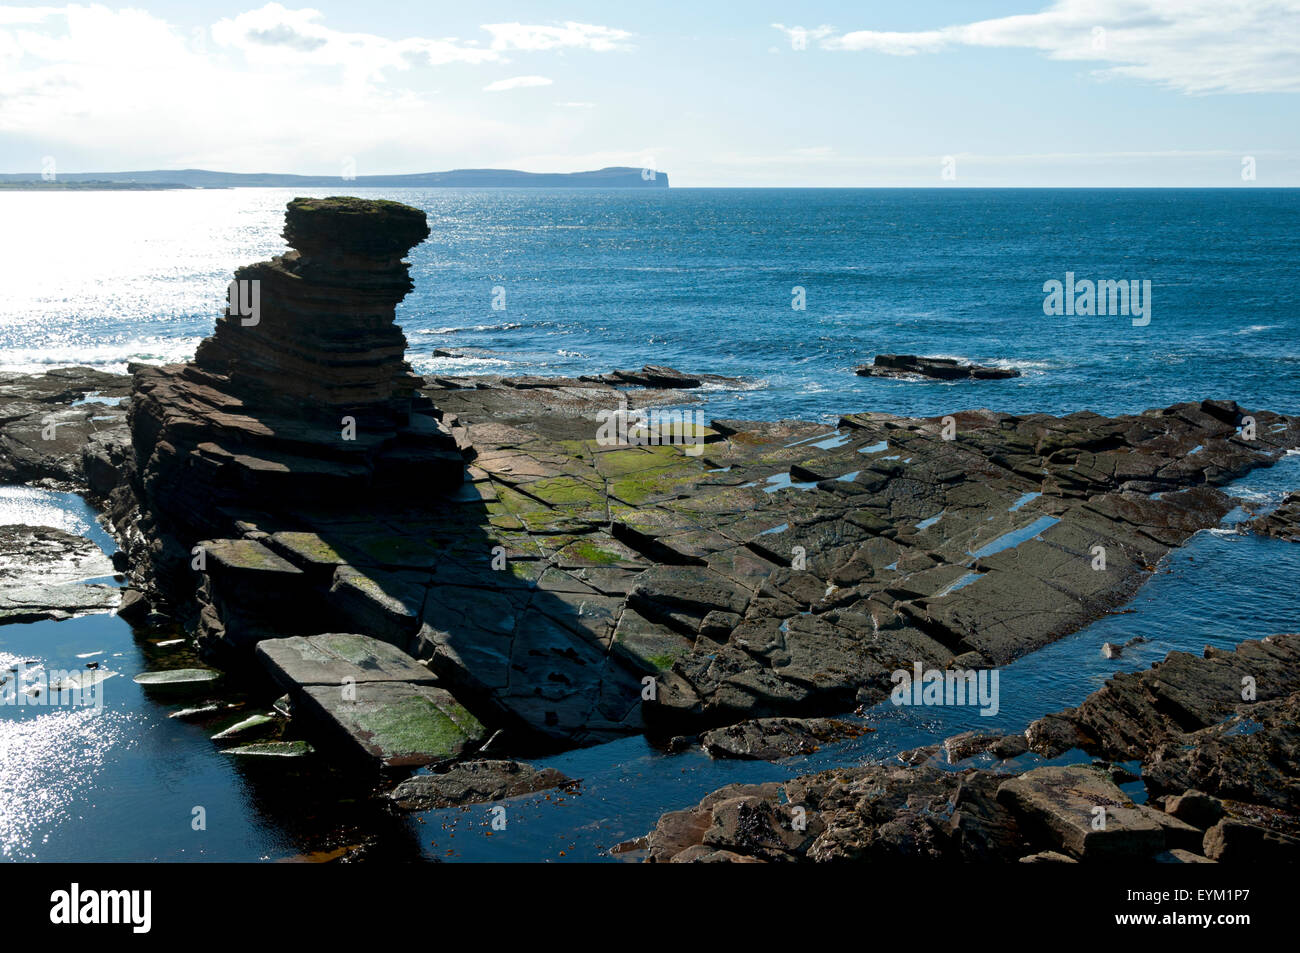 One of the Men of Mey sea stacks at St. John's Point, on the north coast of Caithness, Scotland, UK.  Dunnet Head behind. Stock Photo